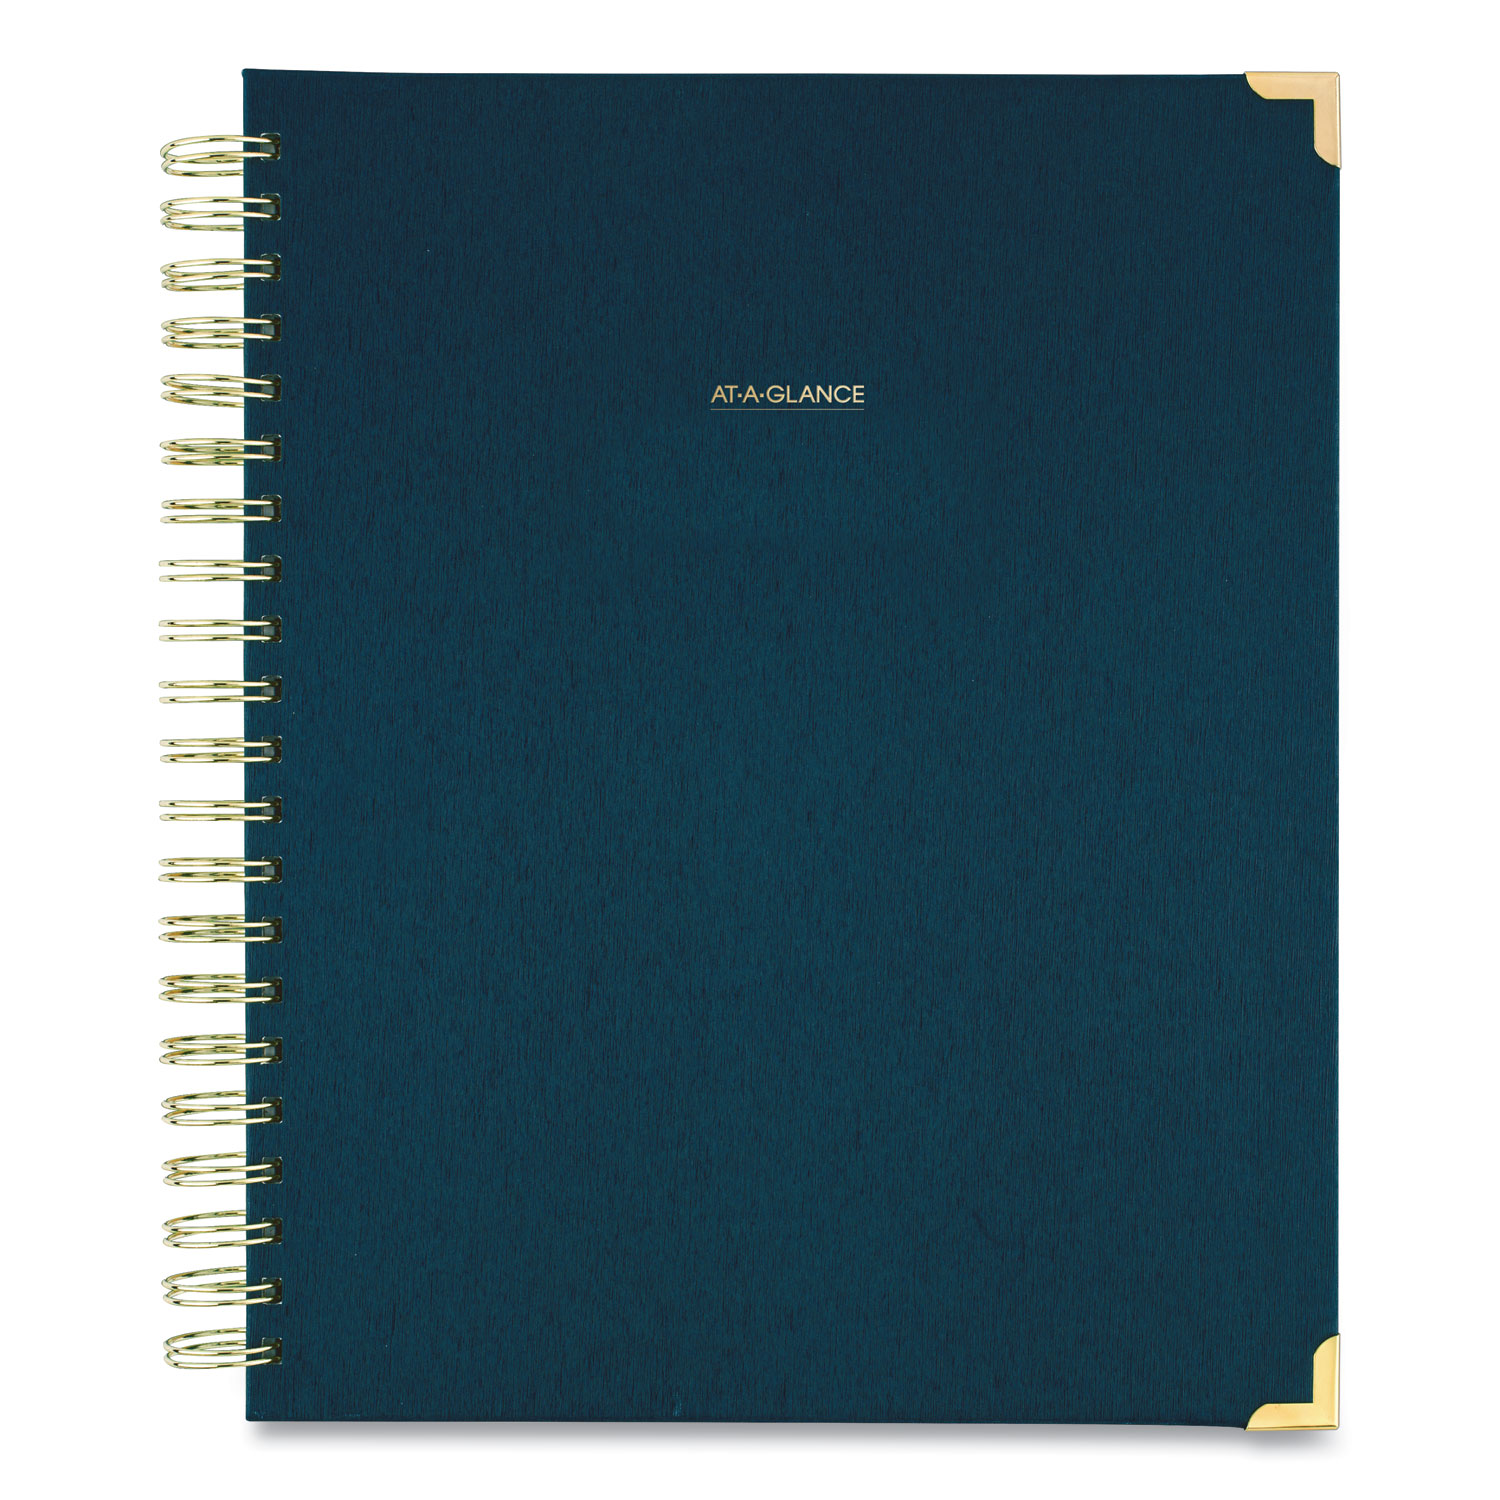 AT-A-GLANCE® Harmony Weekly/Monthly Hardcover Planner, 11 x 8.5, Navy Blue, 2021